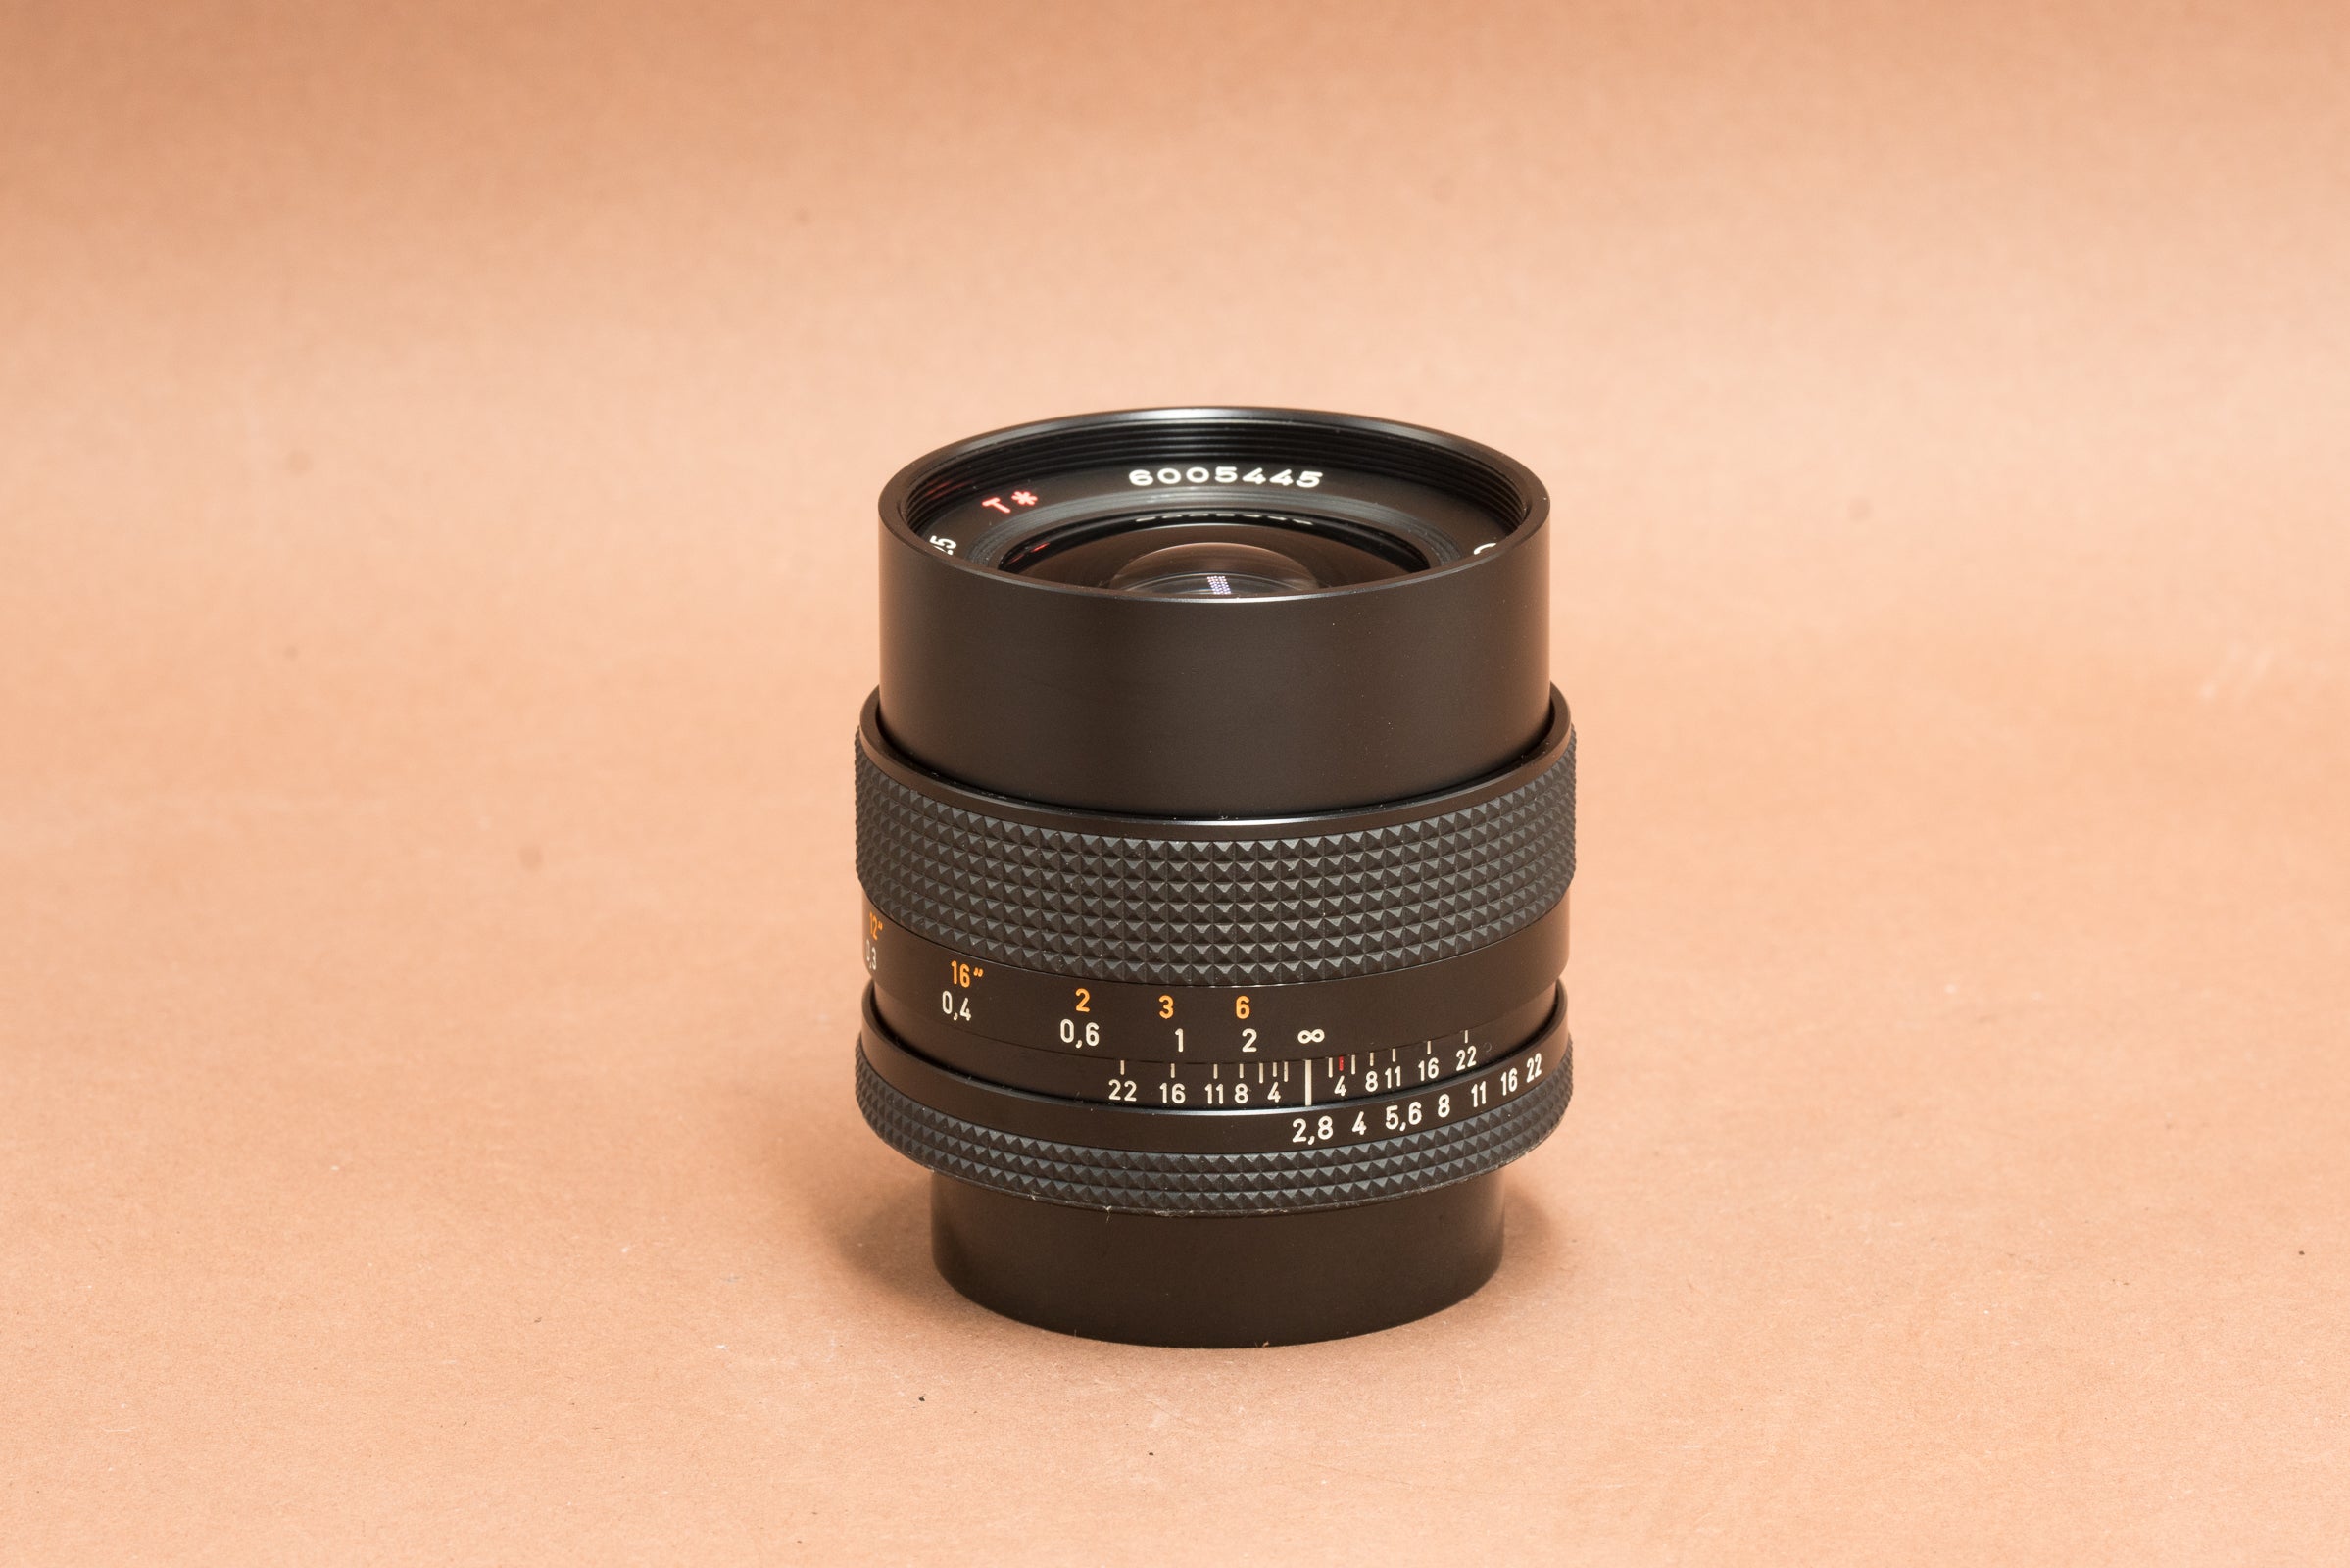 10% OFF ! Contax Zeiss Distagon 25mm f2.8 AEG T*